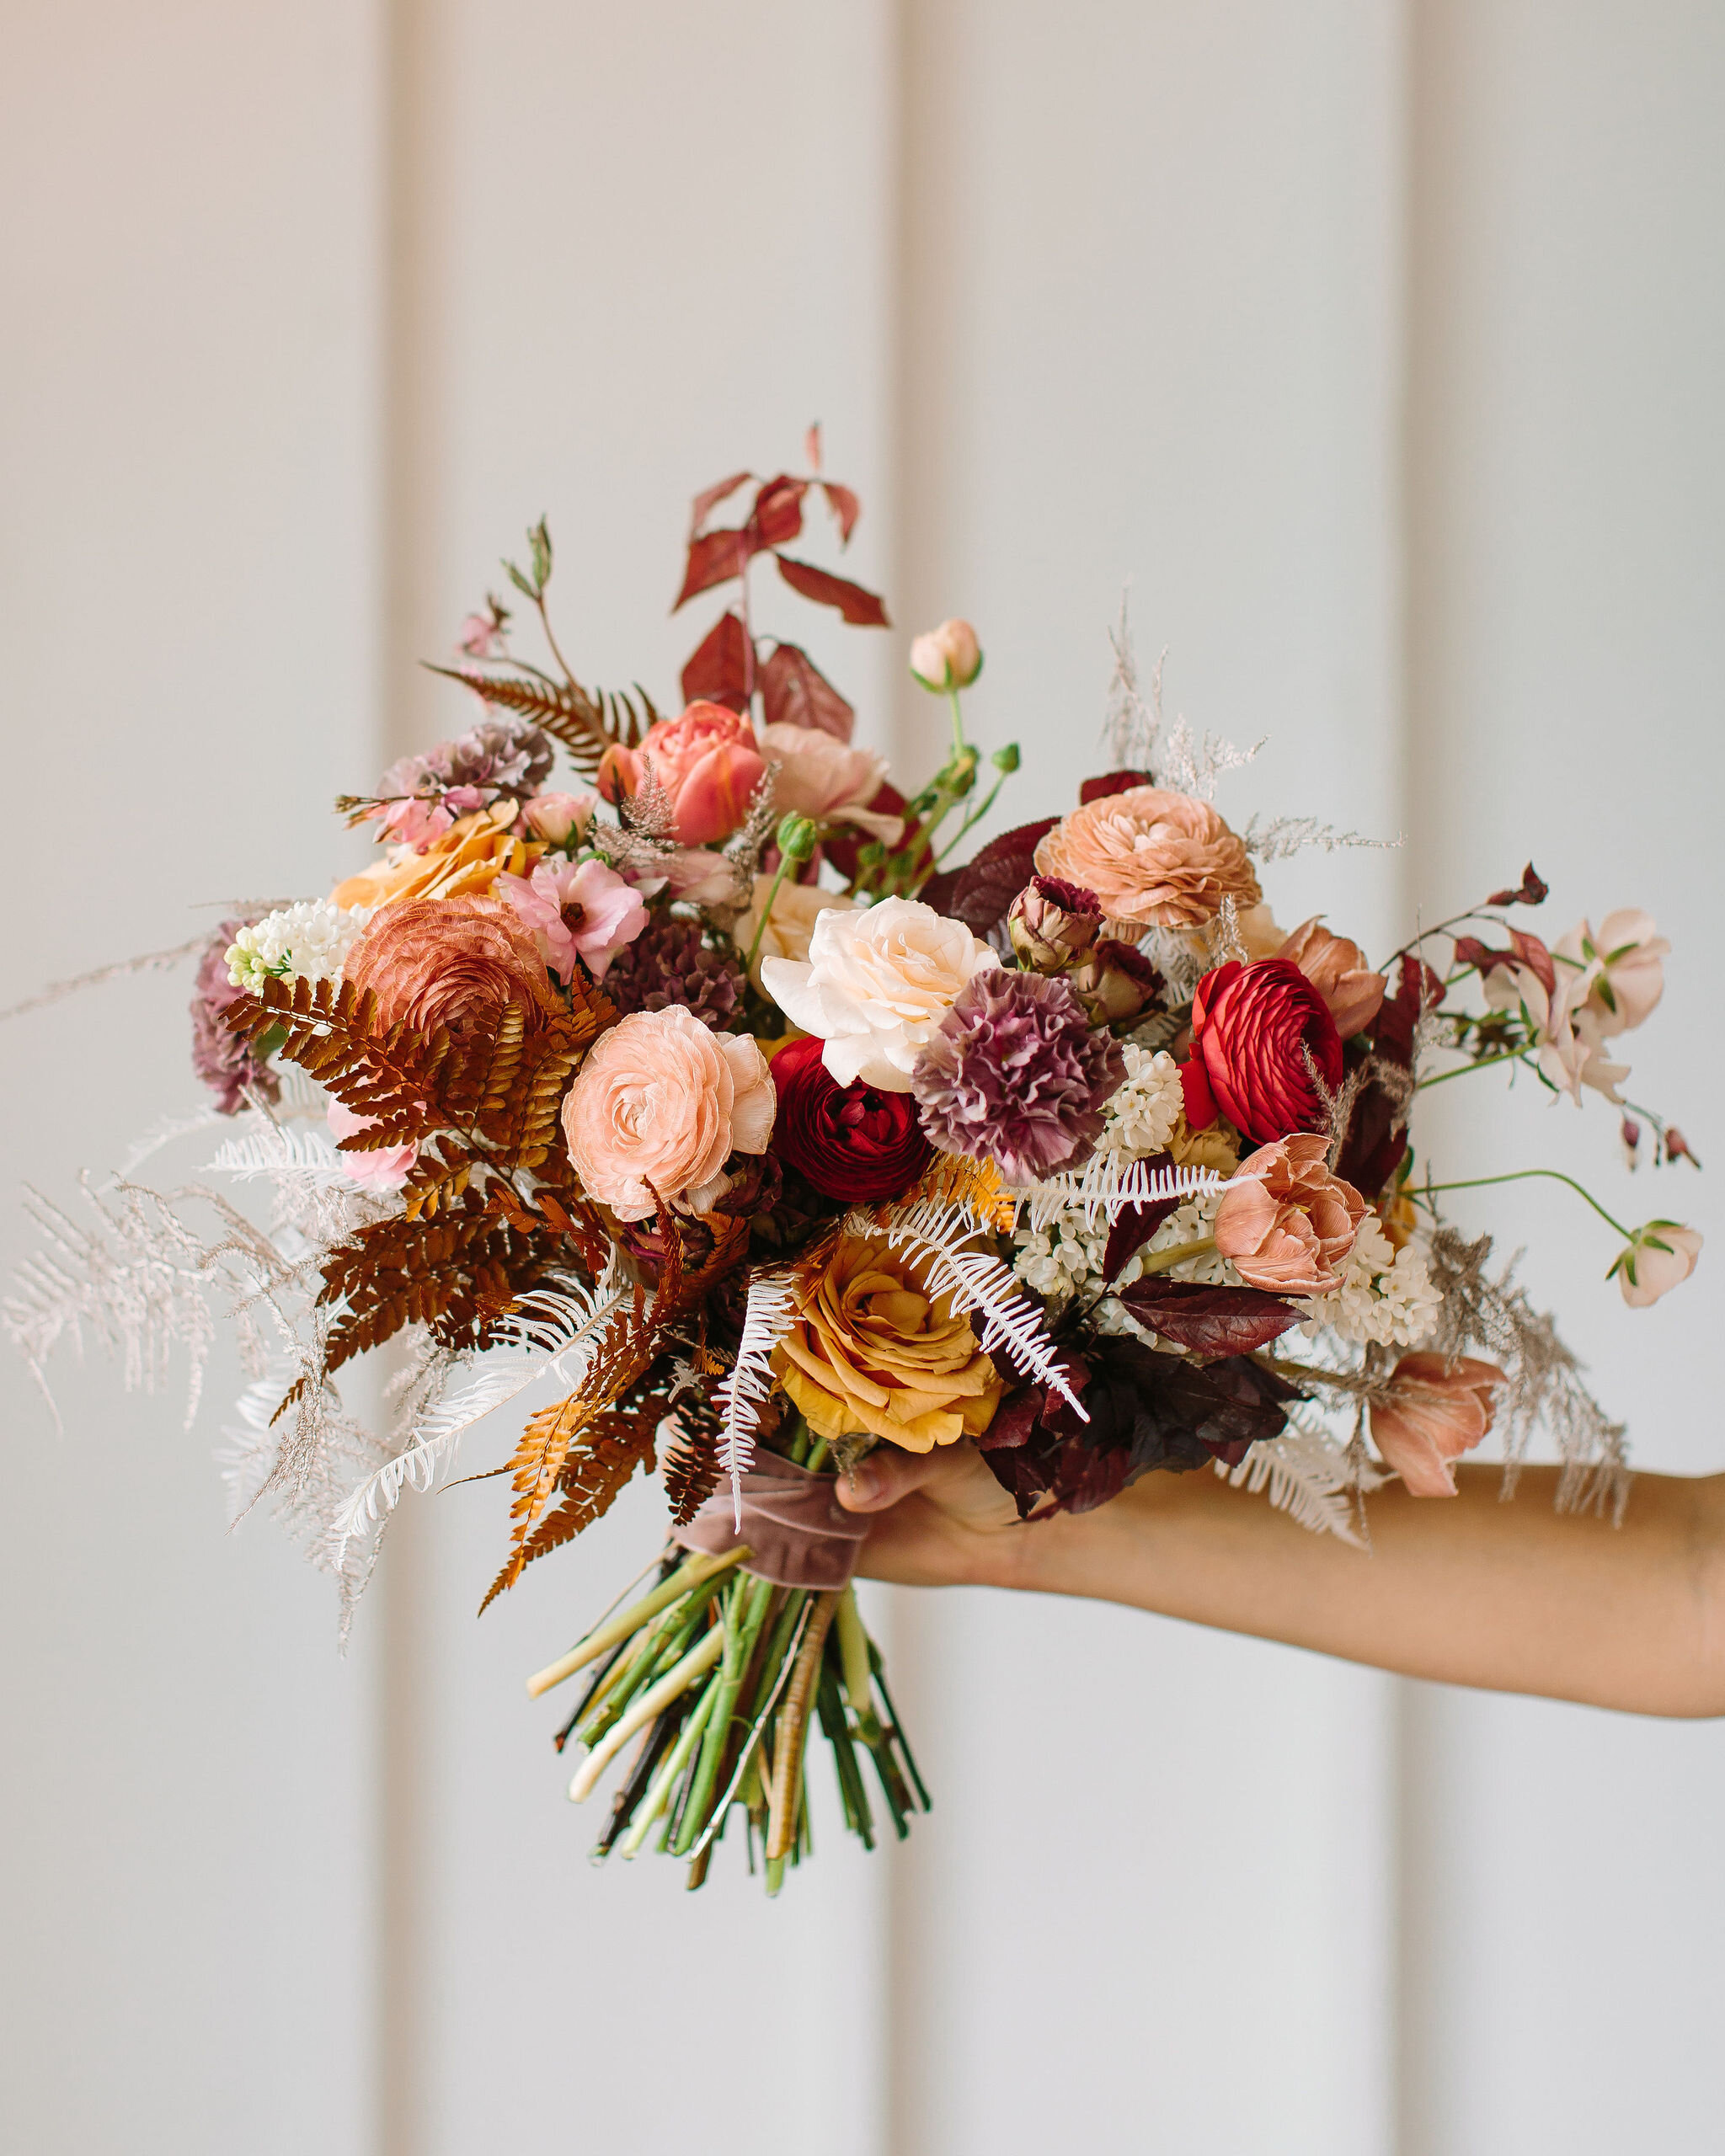 Organic, modern bouquet with dried white ferns, dusty pink ranunculus, golden brown ferns, spirea, bleeding hearts, and other dainty spring flowers. Nashville wedding and event floral design by Rosemary & Finch at 14Tenn.